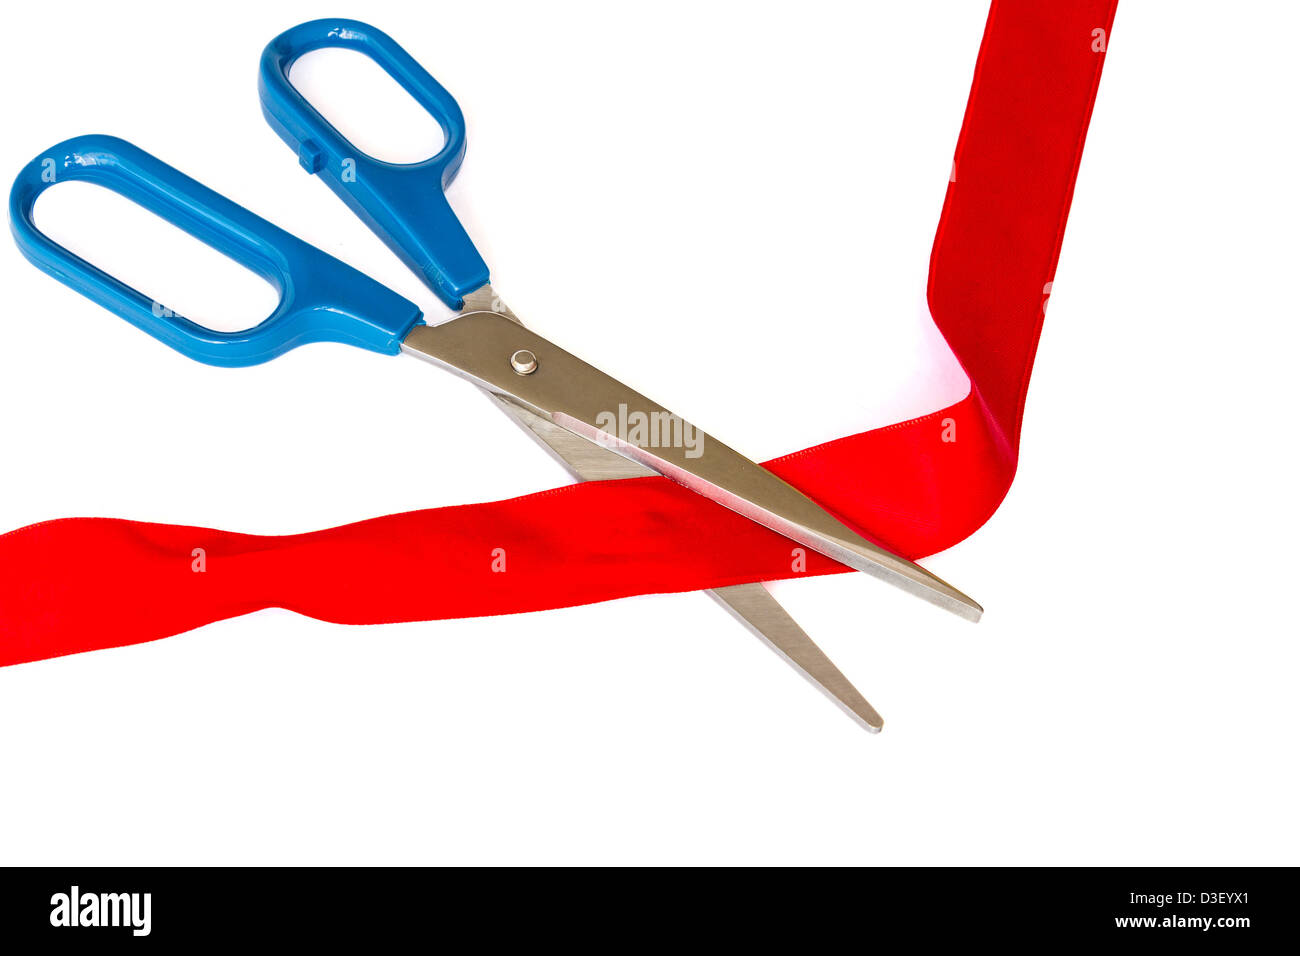 Closeup image of scissors cutting a red ribbon Stock Photo